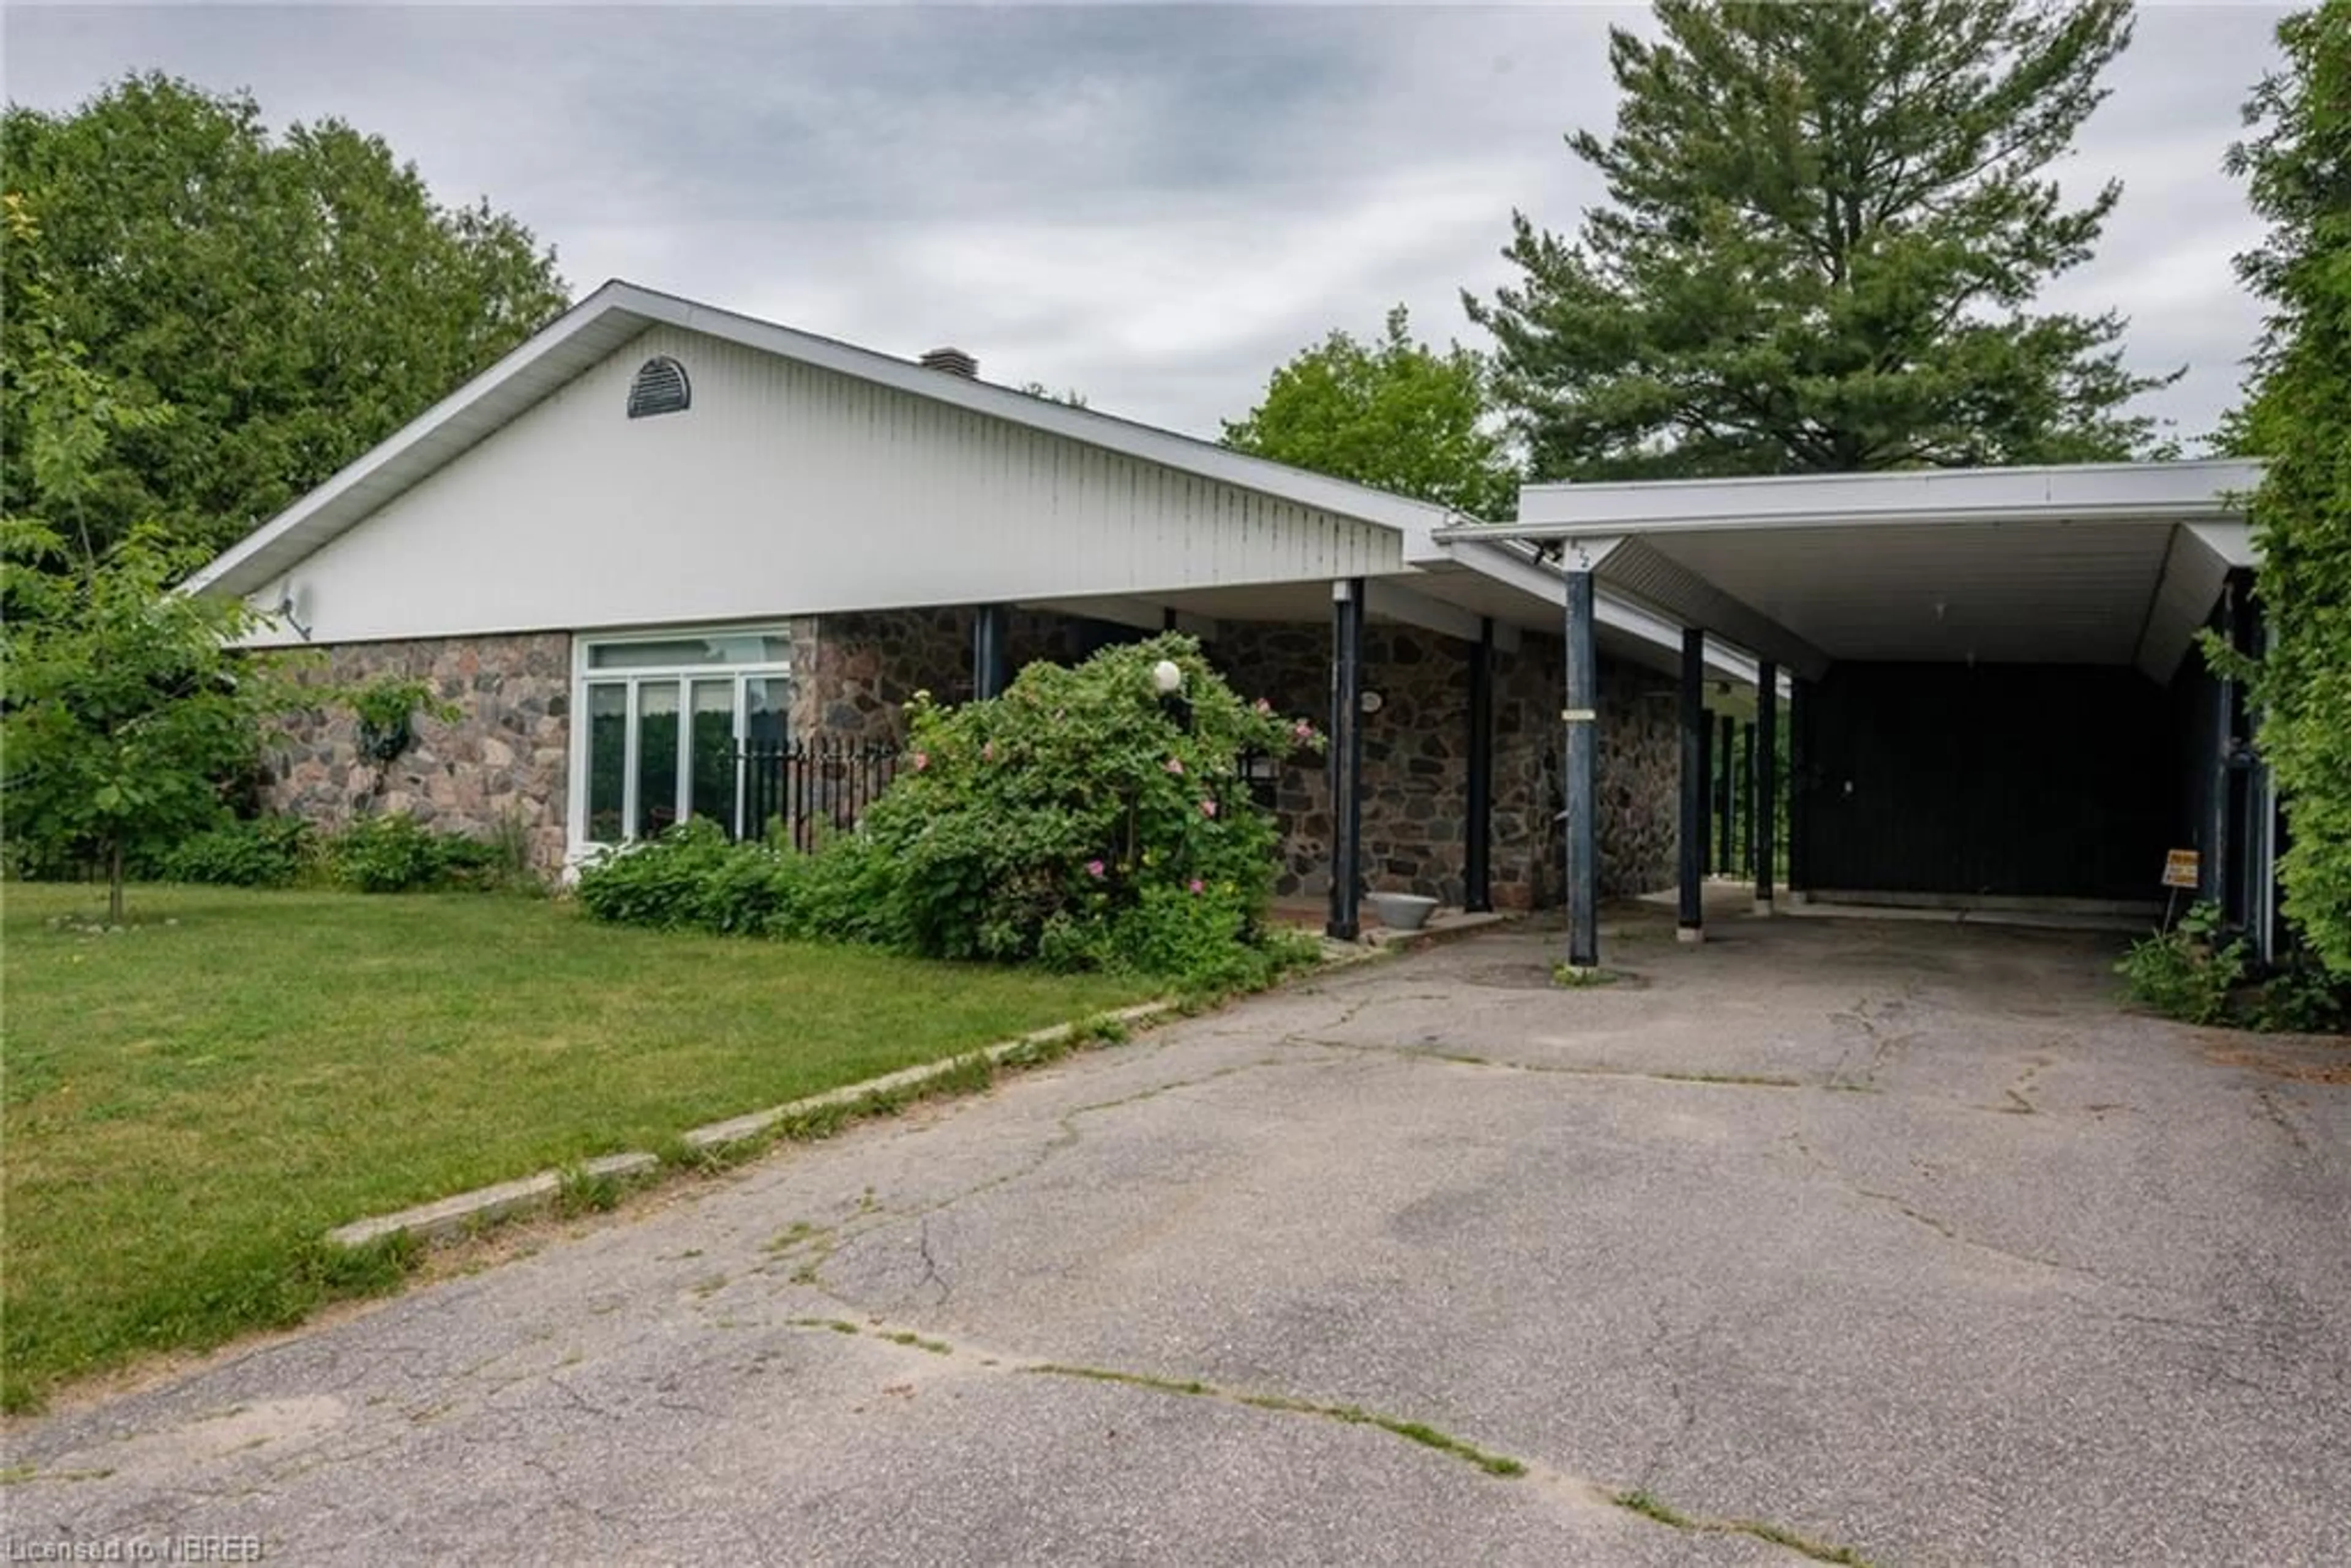 Outside view for 672 Vimy St, North Bay Ontario P1B 5B2